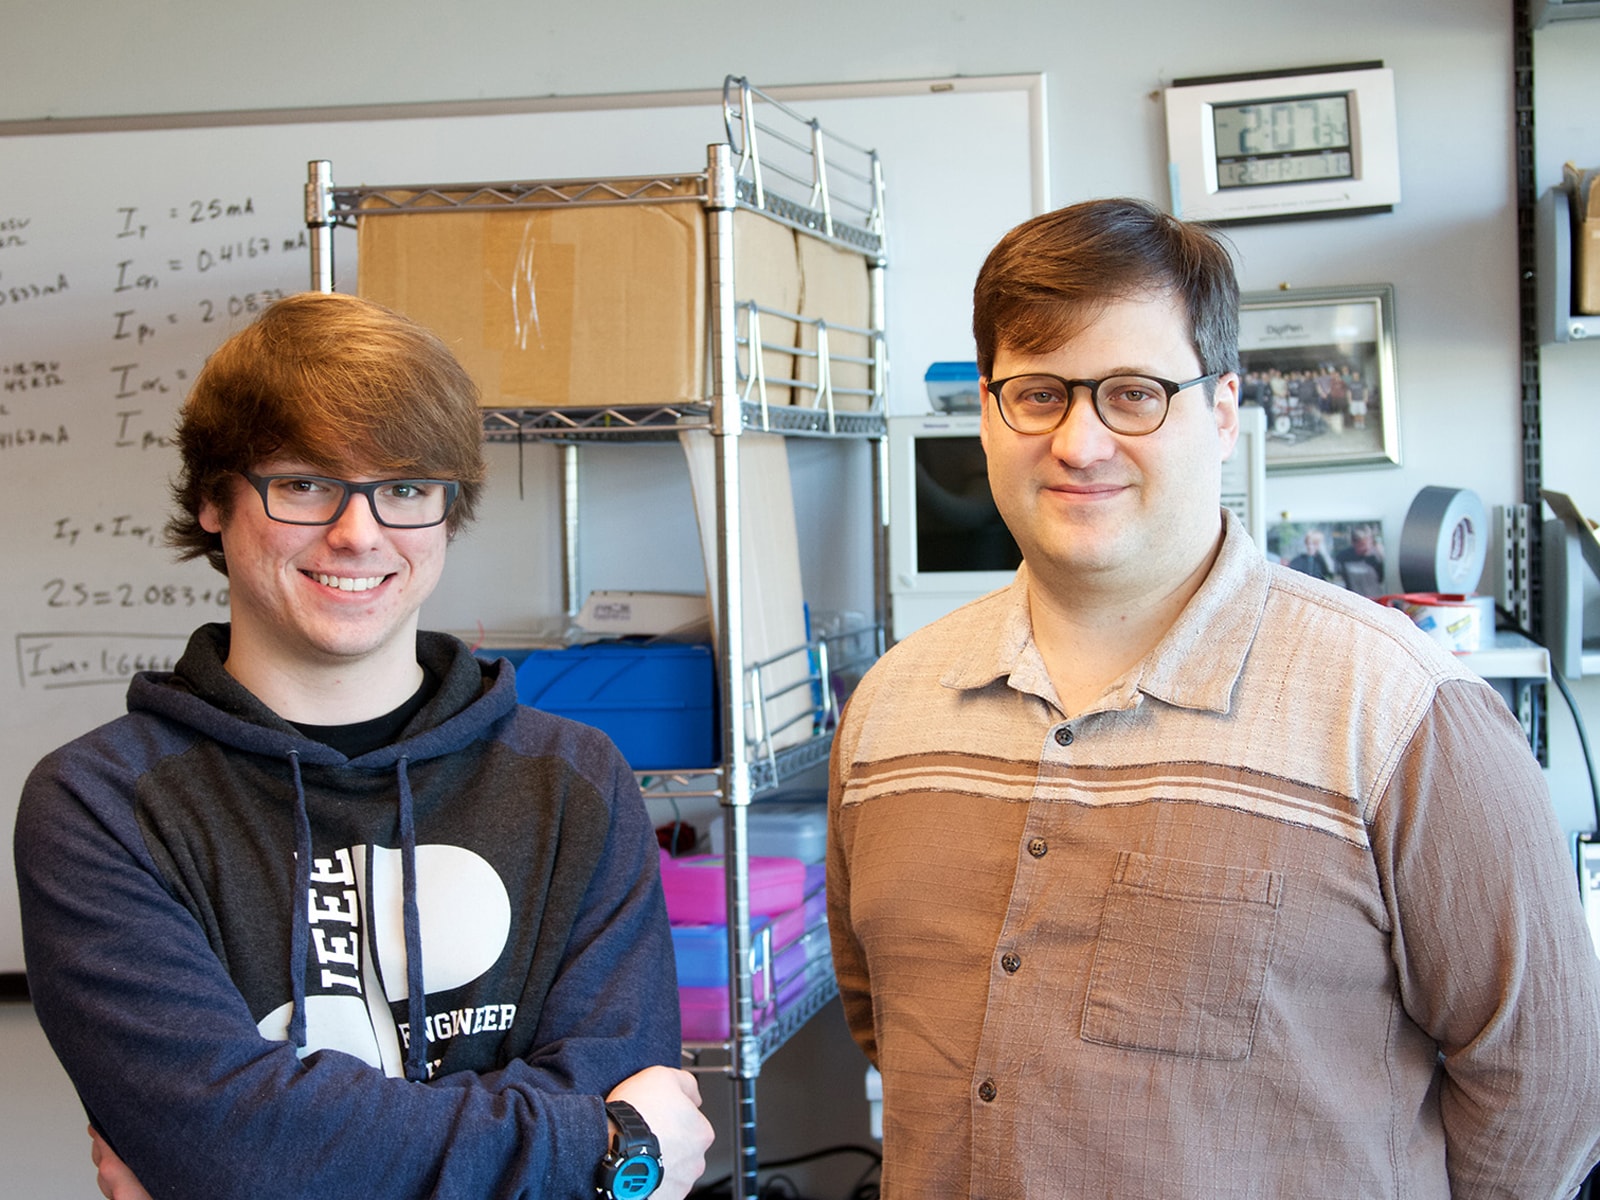 DigiPen student Jimi Huard and professor Jeremy Thomas smiling side by side in a DigiPen computer engineering lab